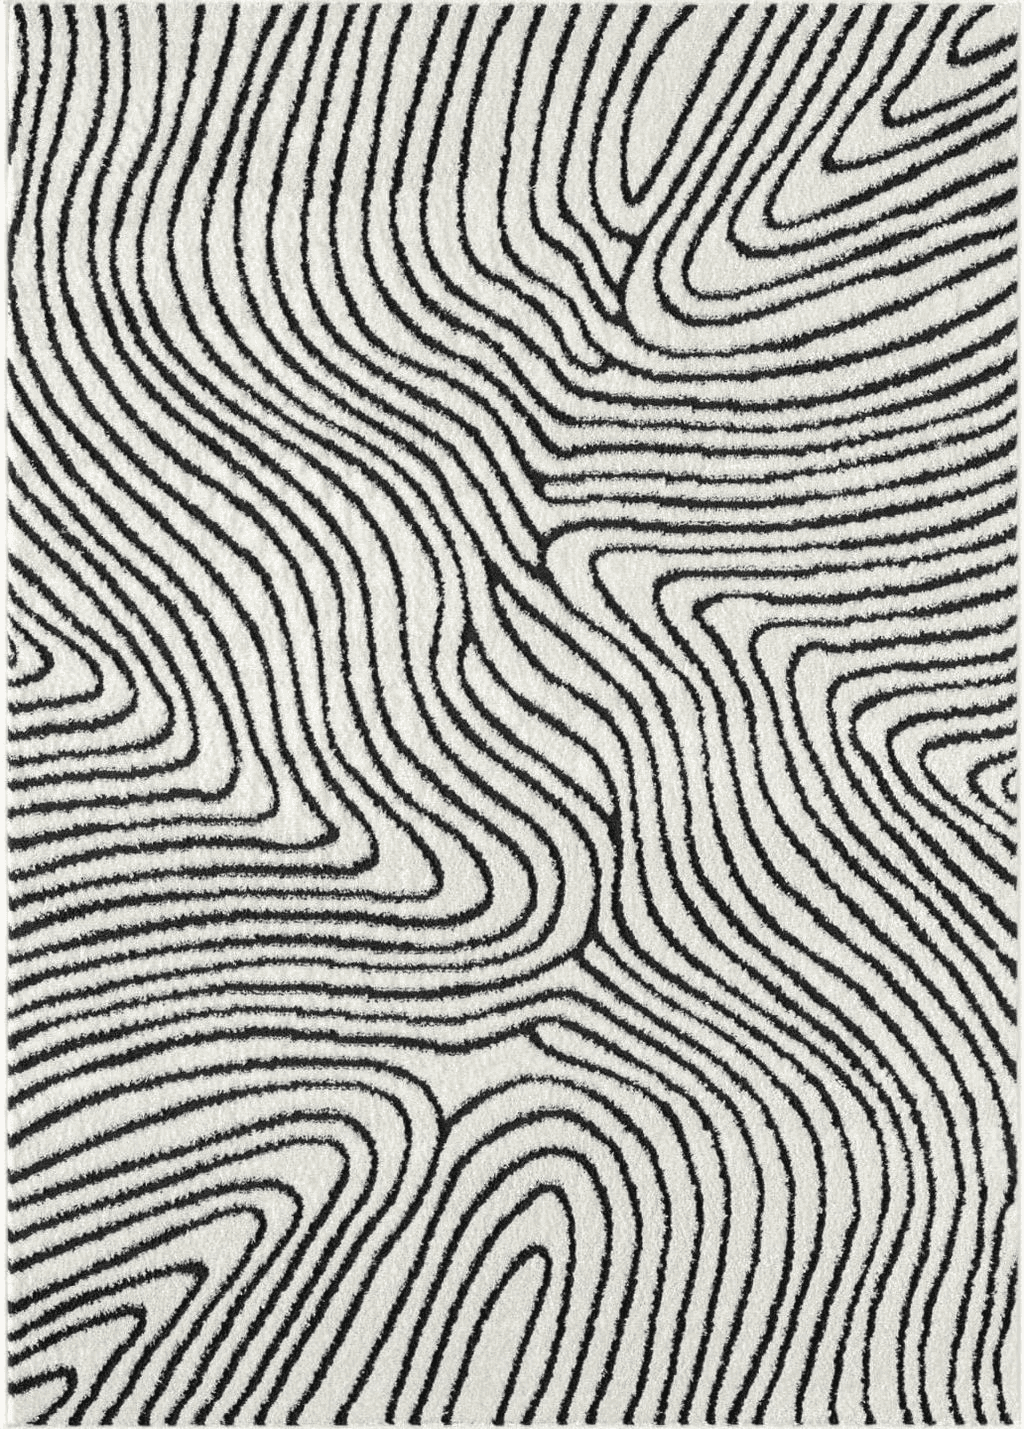 Area White LUXE WEAVERS Le Monde Collection 8505 Anthracite 5x7 Geometric Marble Swirl Area Rug